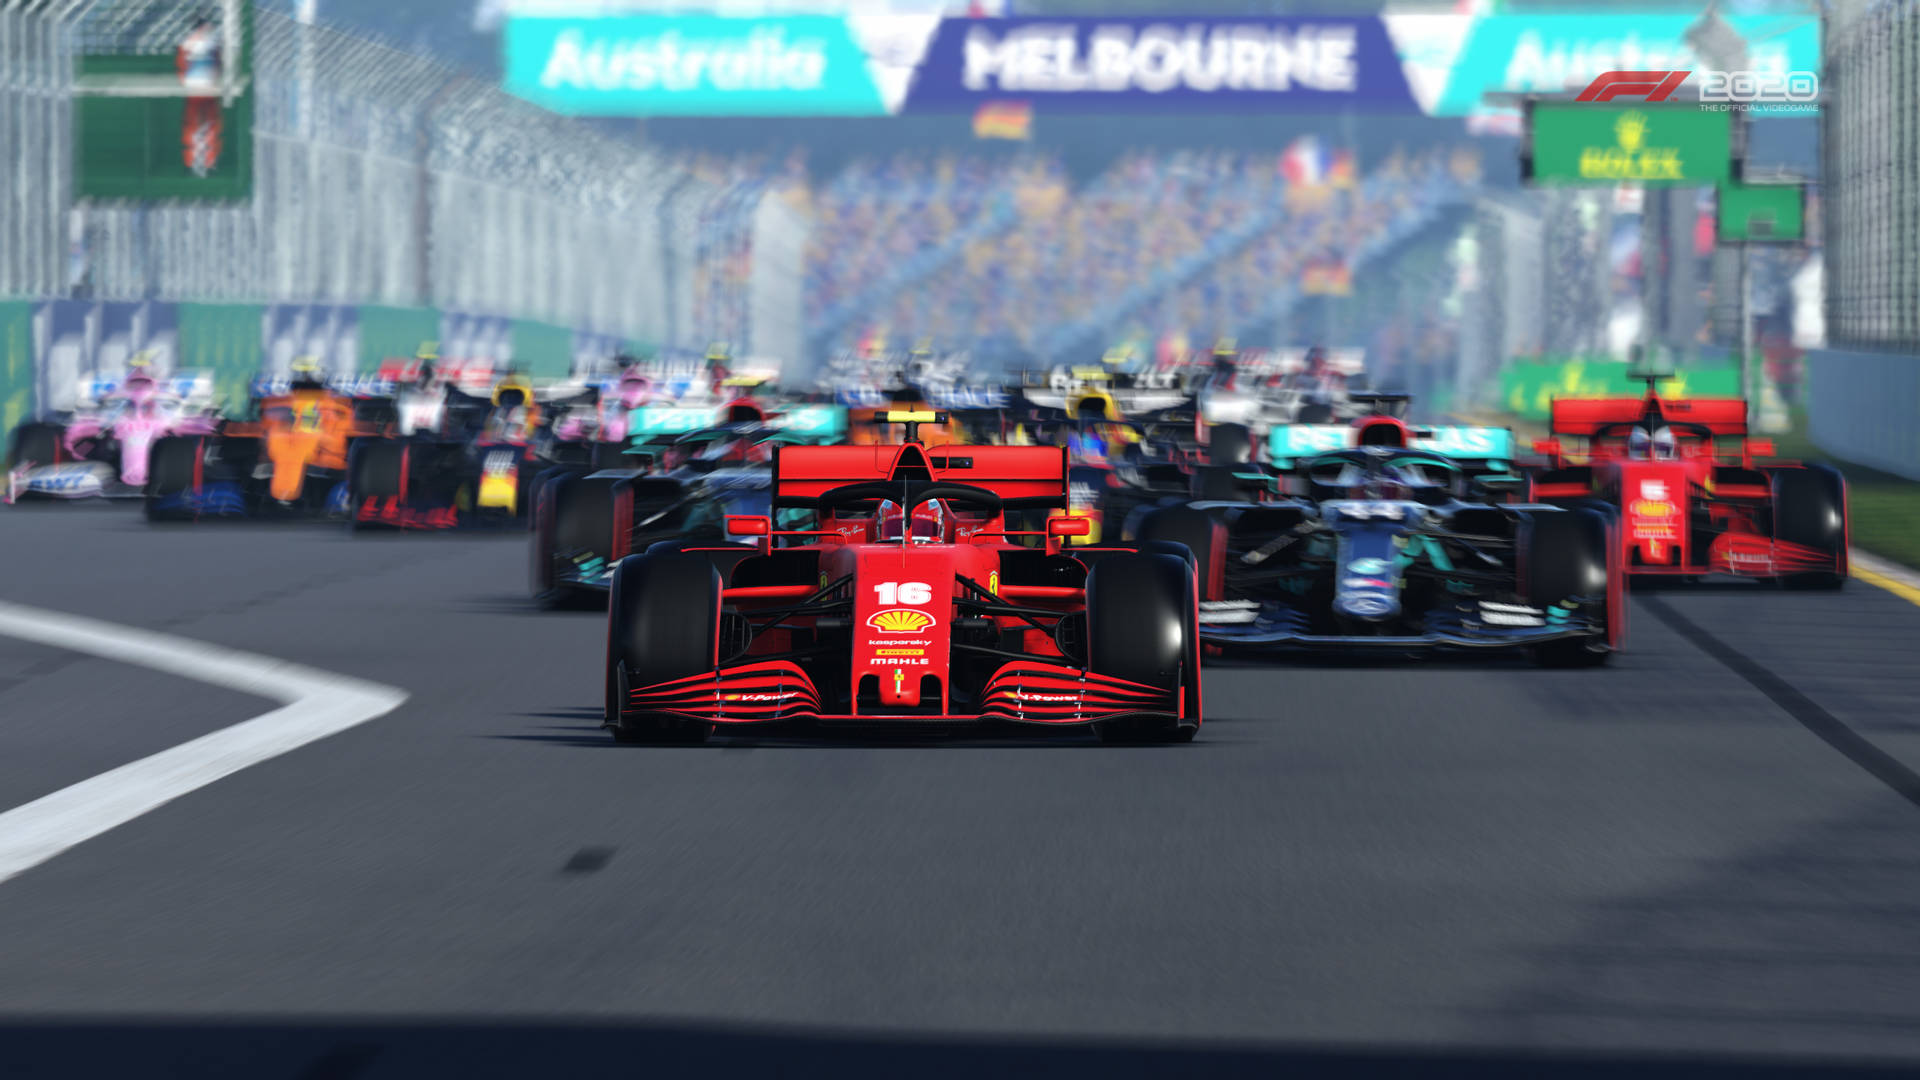 A Race Track With Many Cars Racing In Front Of A Crowd Background